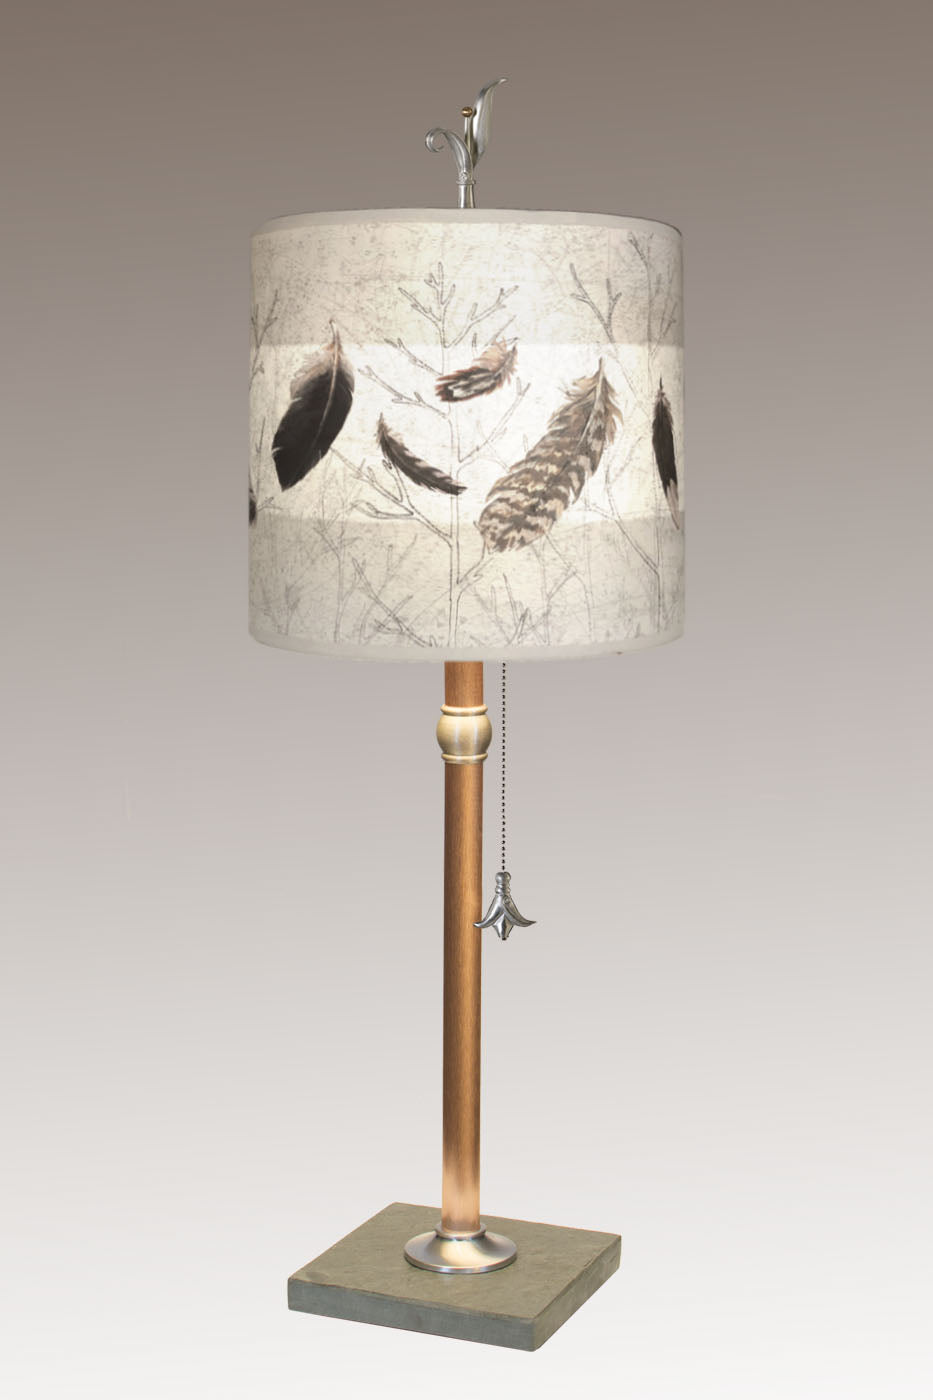 Copper Table Lamp with Medium Drum Shade in Feathers in Pebble